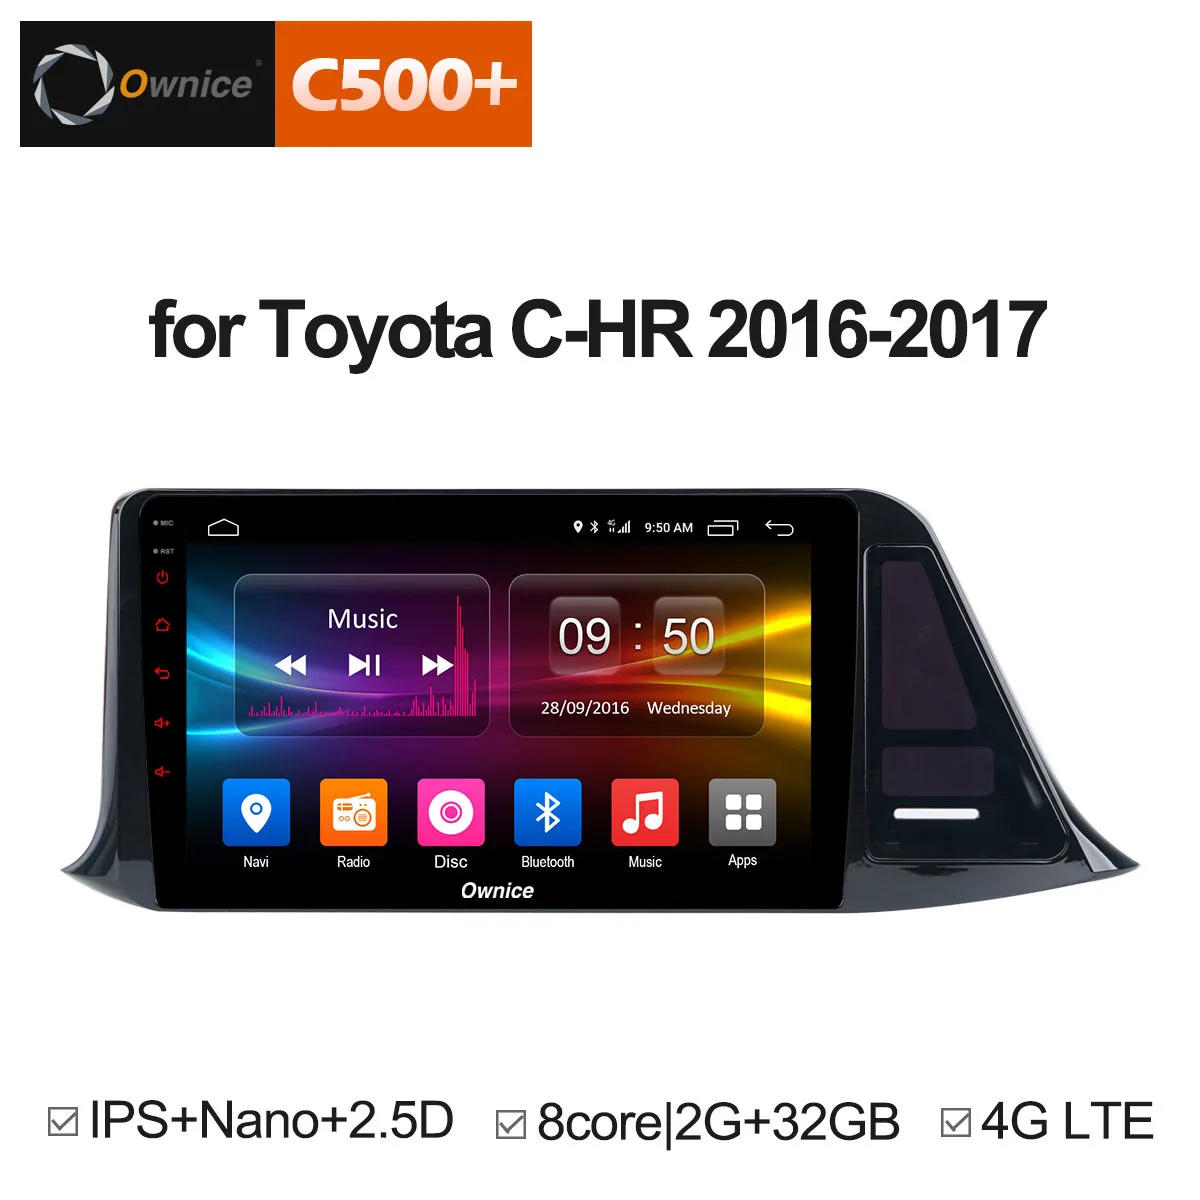 Top Ownice C500+ G10 Car dvd for Toyota C-HR C HR CHR 2016 2017 Car Android 8.1 Radio Audio GPS Player Navi Stereo Multimedia 4G LTE 0